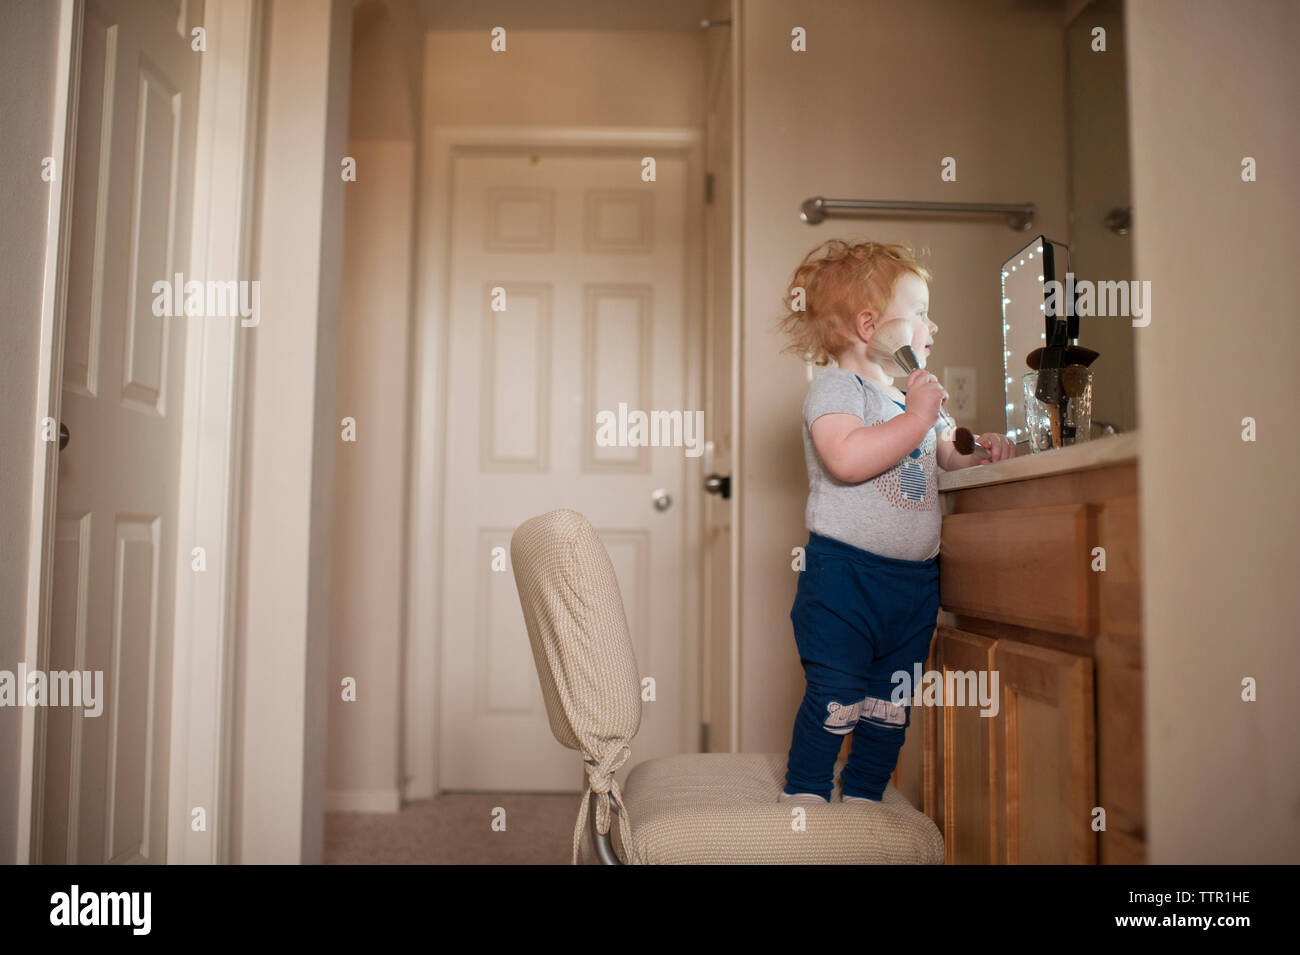 Cute baby boy applying make-up while standing on chair at home Stock Photo